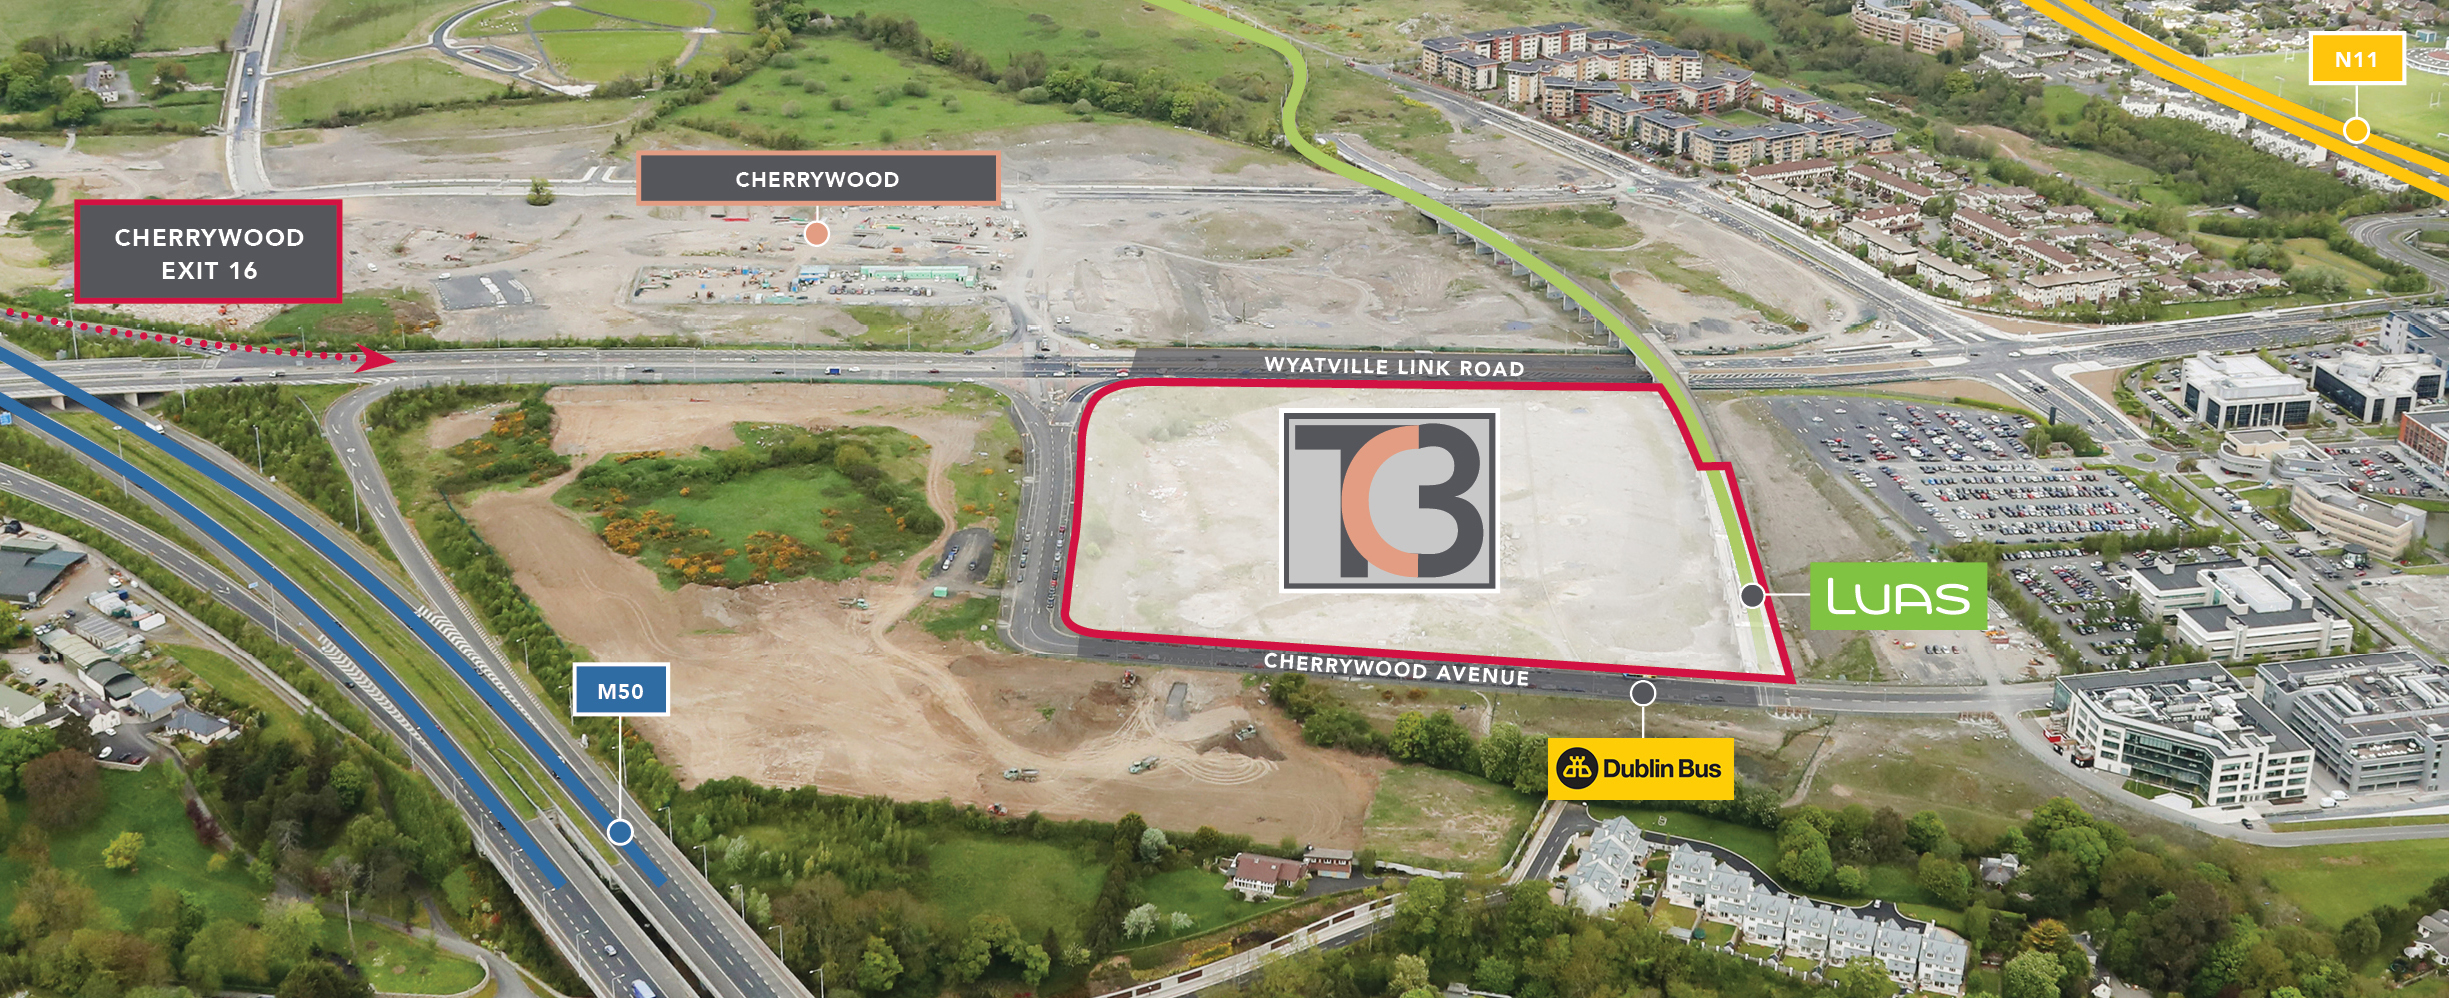 Owner of Cherrywood site looking for Dublin property swap